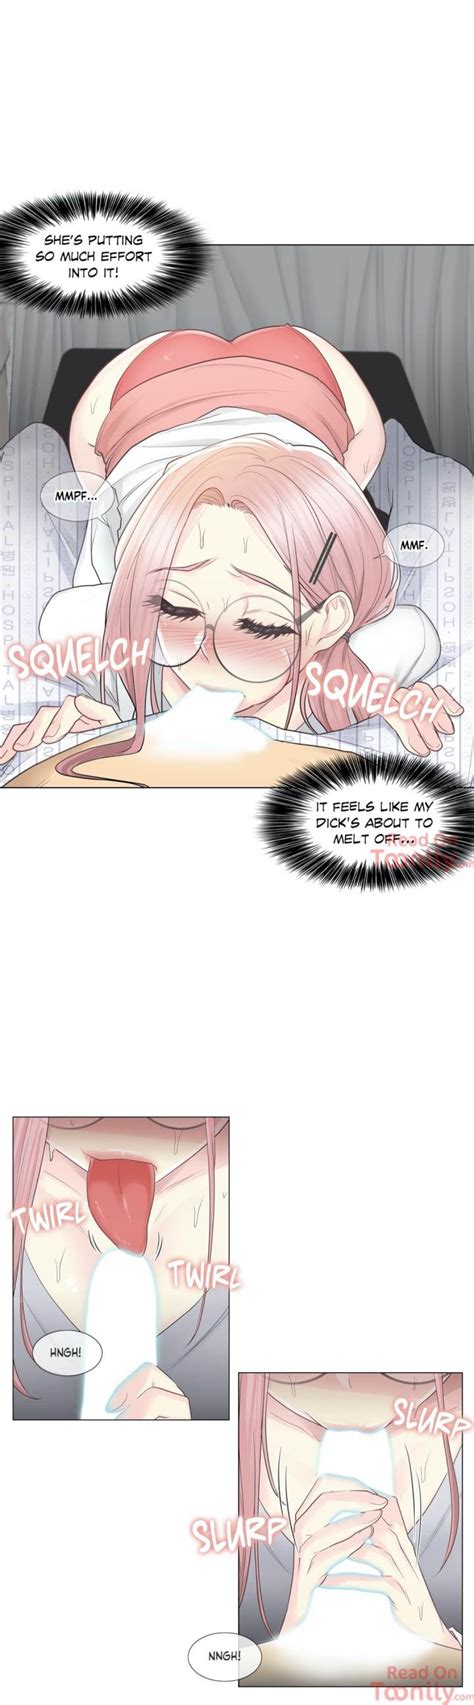 Read touch to unlock manga online free and high quality. Touch to Unlock - Chapter 11 - WEBTOON XYZ